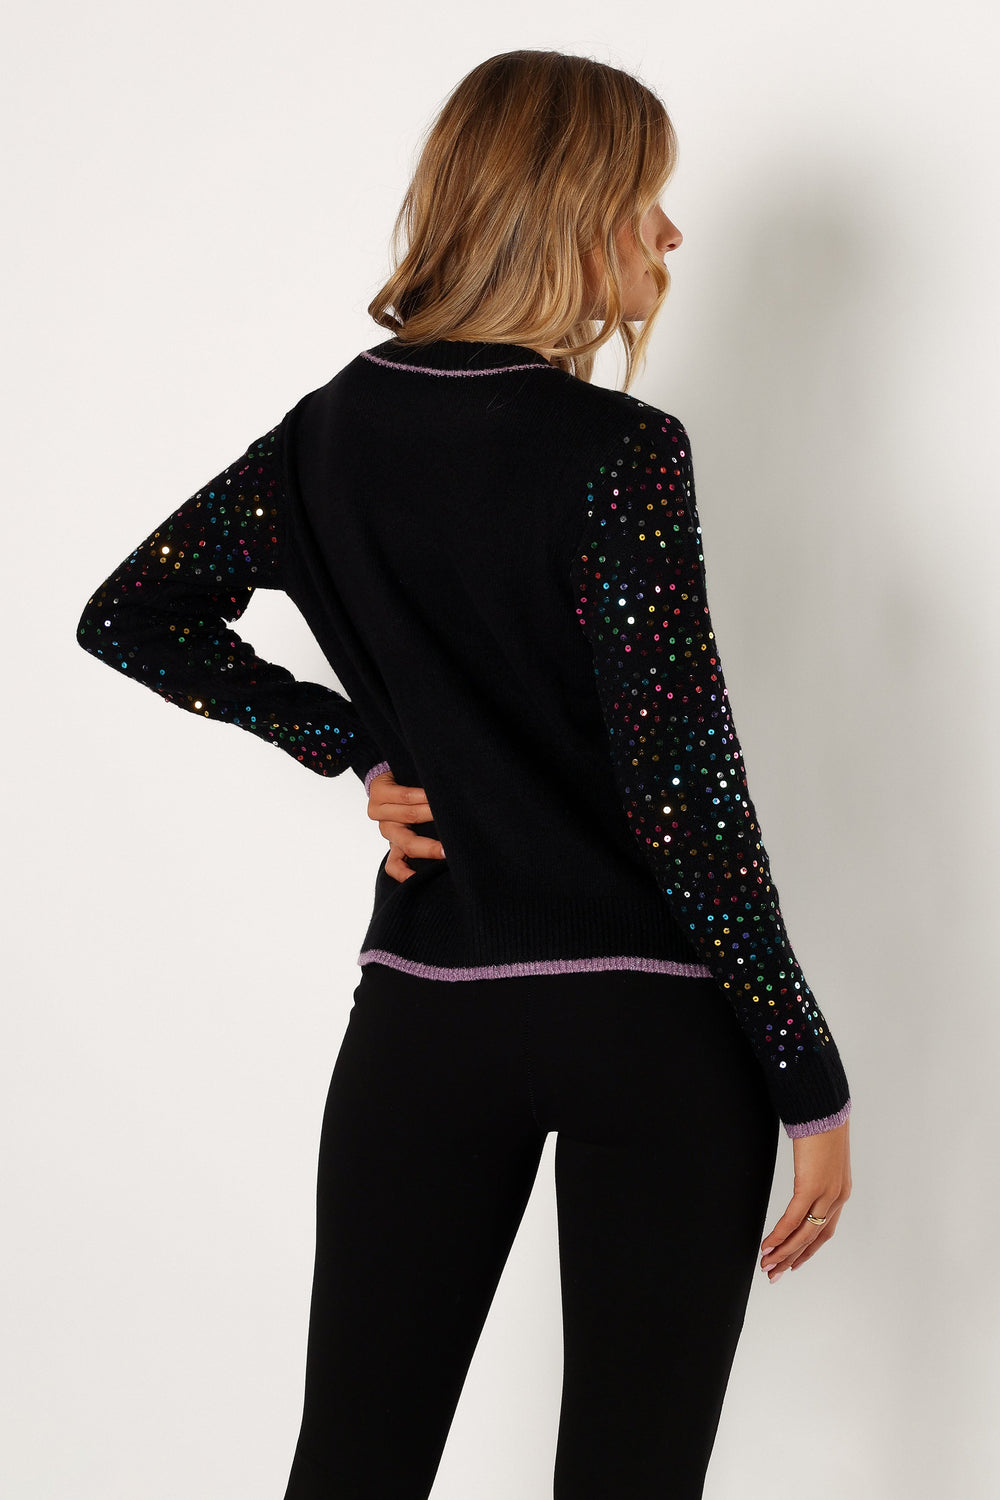 Petal and Pup USA KNITWEAR Ariella Sequin Embellished Knit Sweater - Black